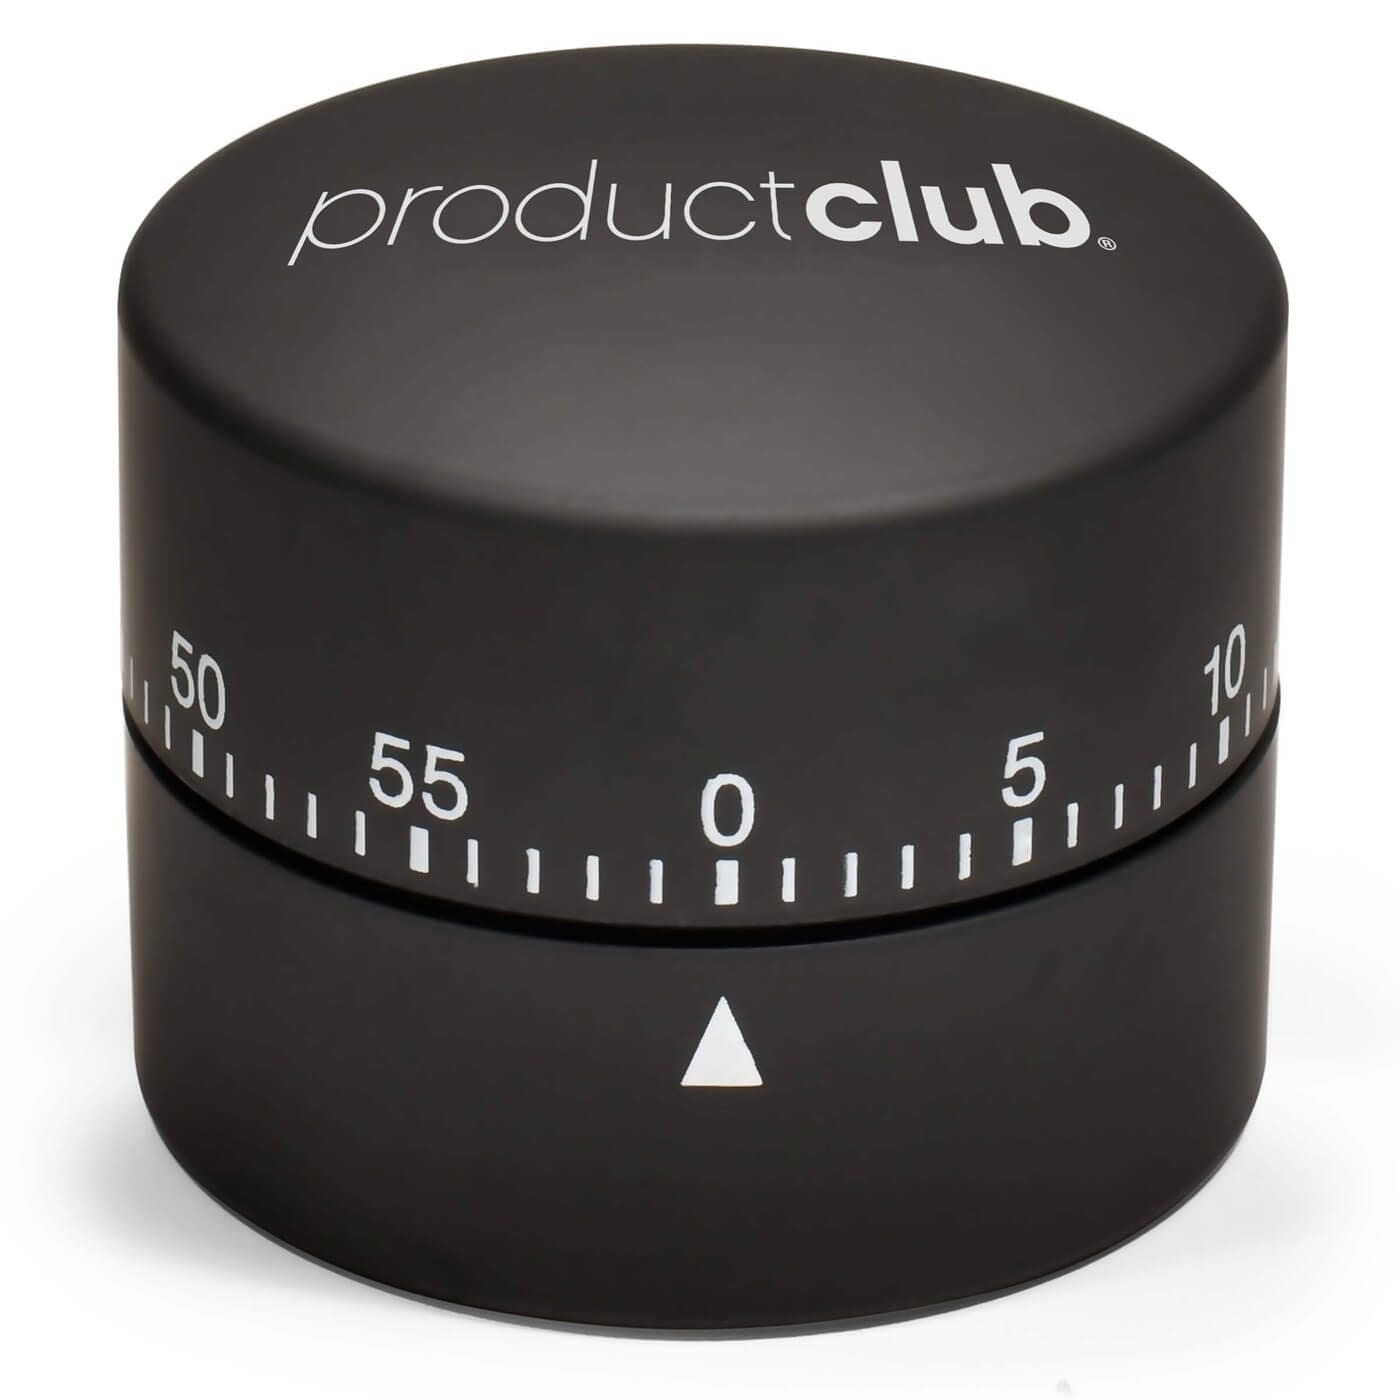 60-Minute Timer | MT-1 | Product Club HAIR COLORING ACCESSORIES PRODUCT CLUB 